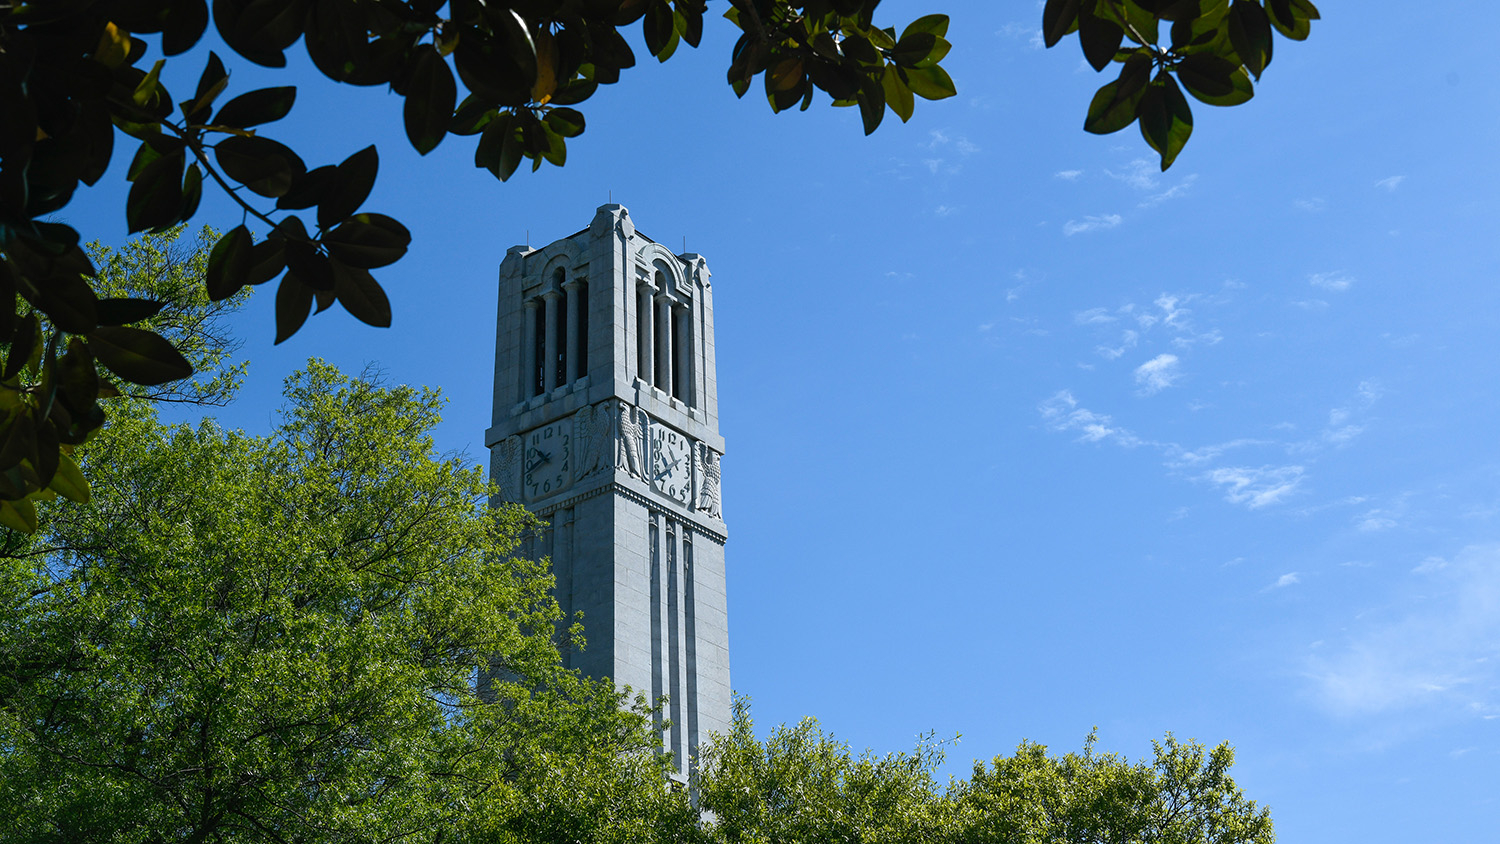 NCSU Bell Tower upward view in front of a blue sky